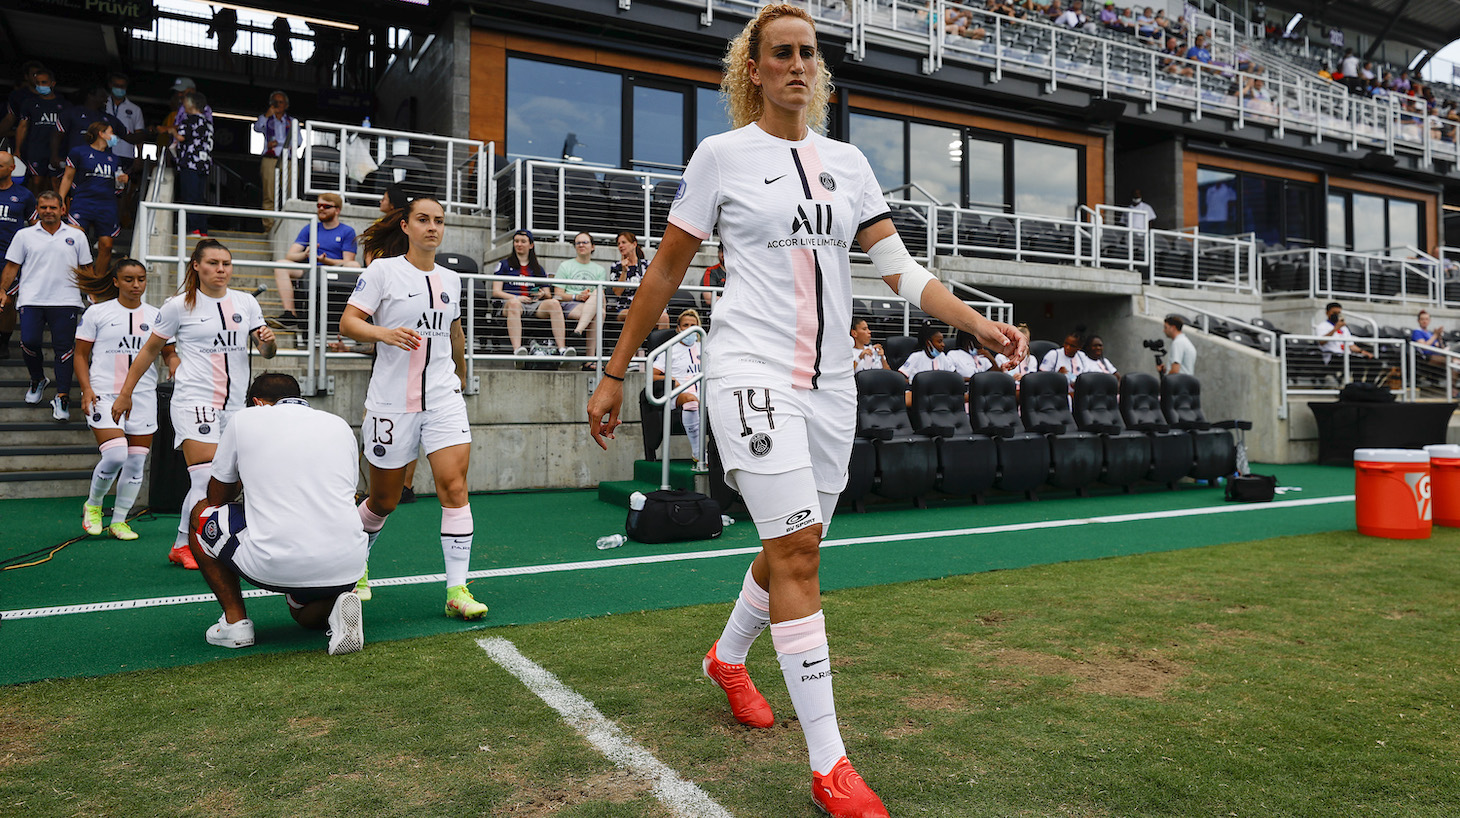 Kheira Hamraoui #14 of Paris Saint-Germain takes the field before playing against Chicago Red Stars during The Women's Cup Third Place match at Lynn Family Stadium on August 21, 2021 in Louisville, Kentucky.